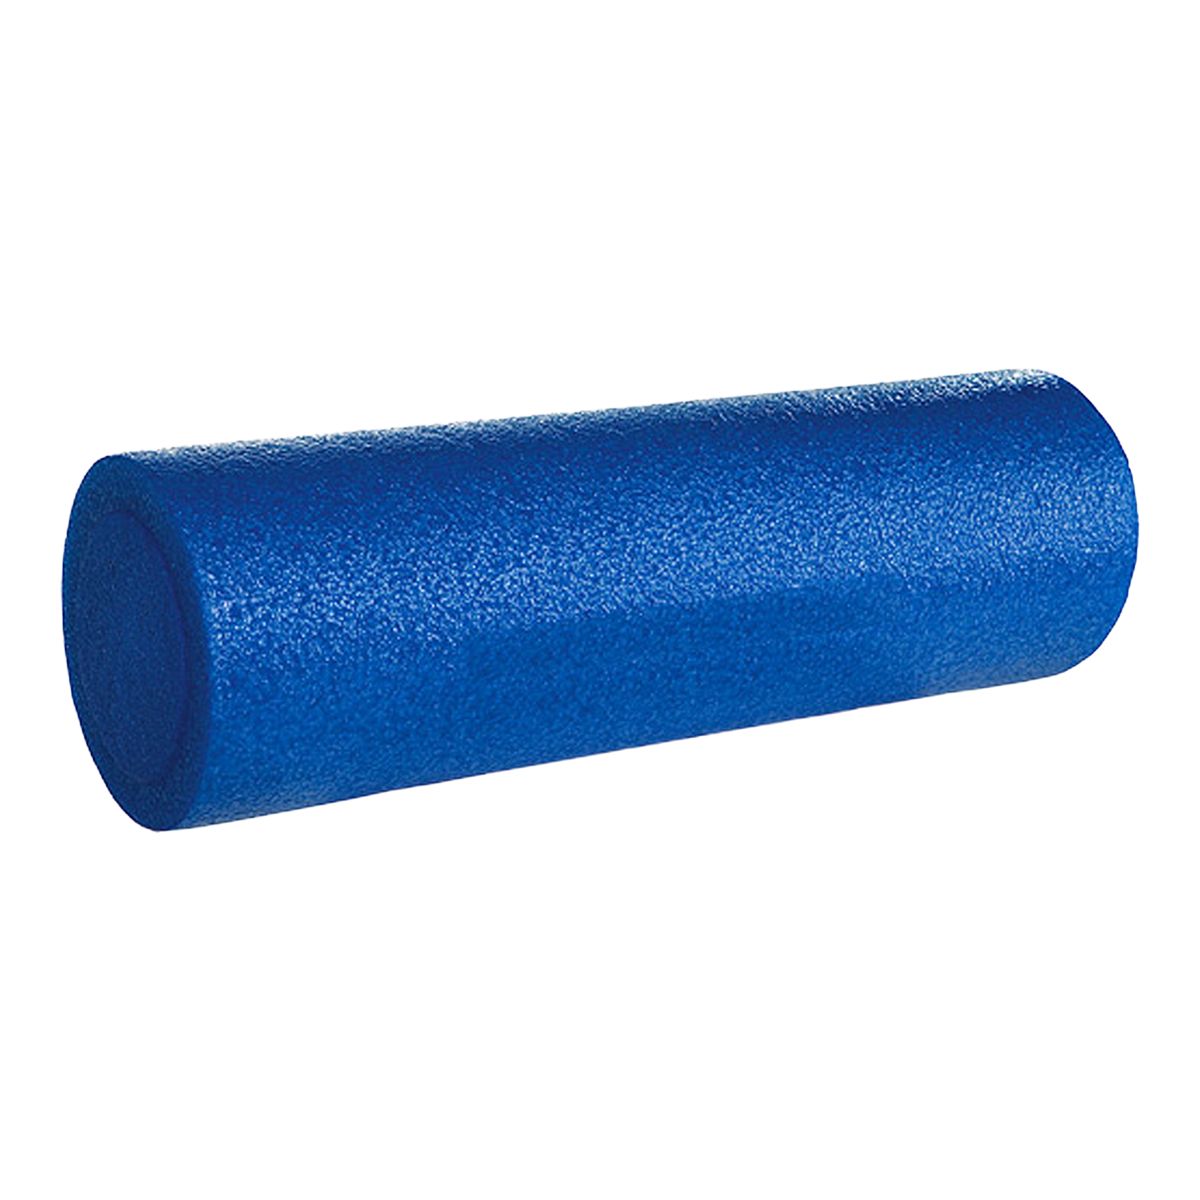 Image of Iron Body Fitness Classic 18 Inch x 6 Inch Foam Roller